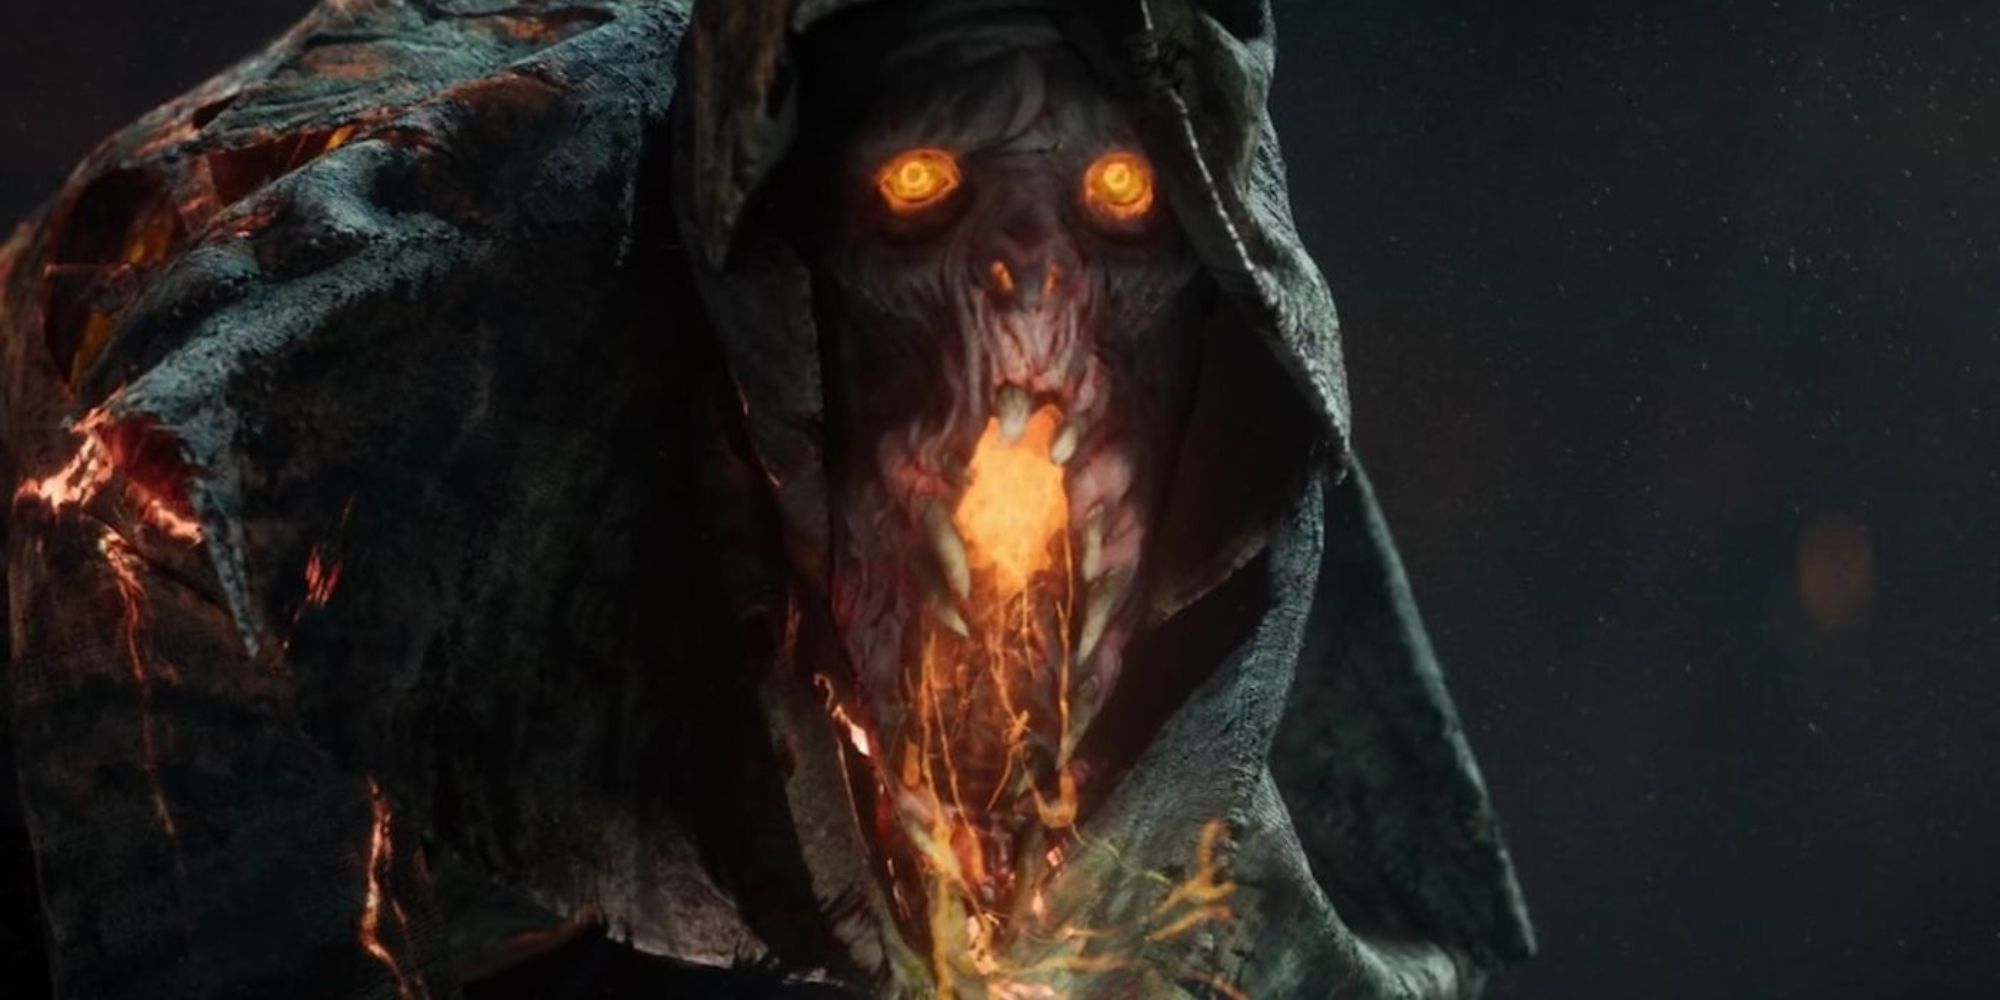 close up of The Blight from Dead By Daylight